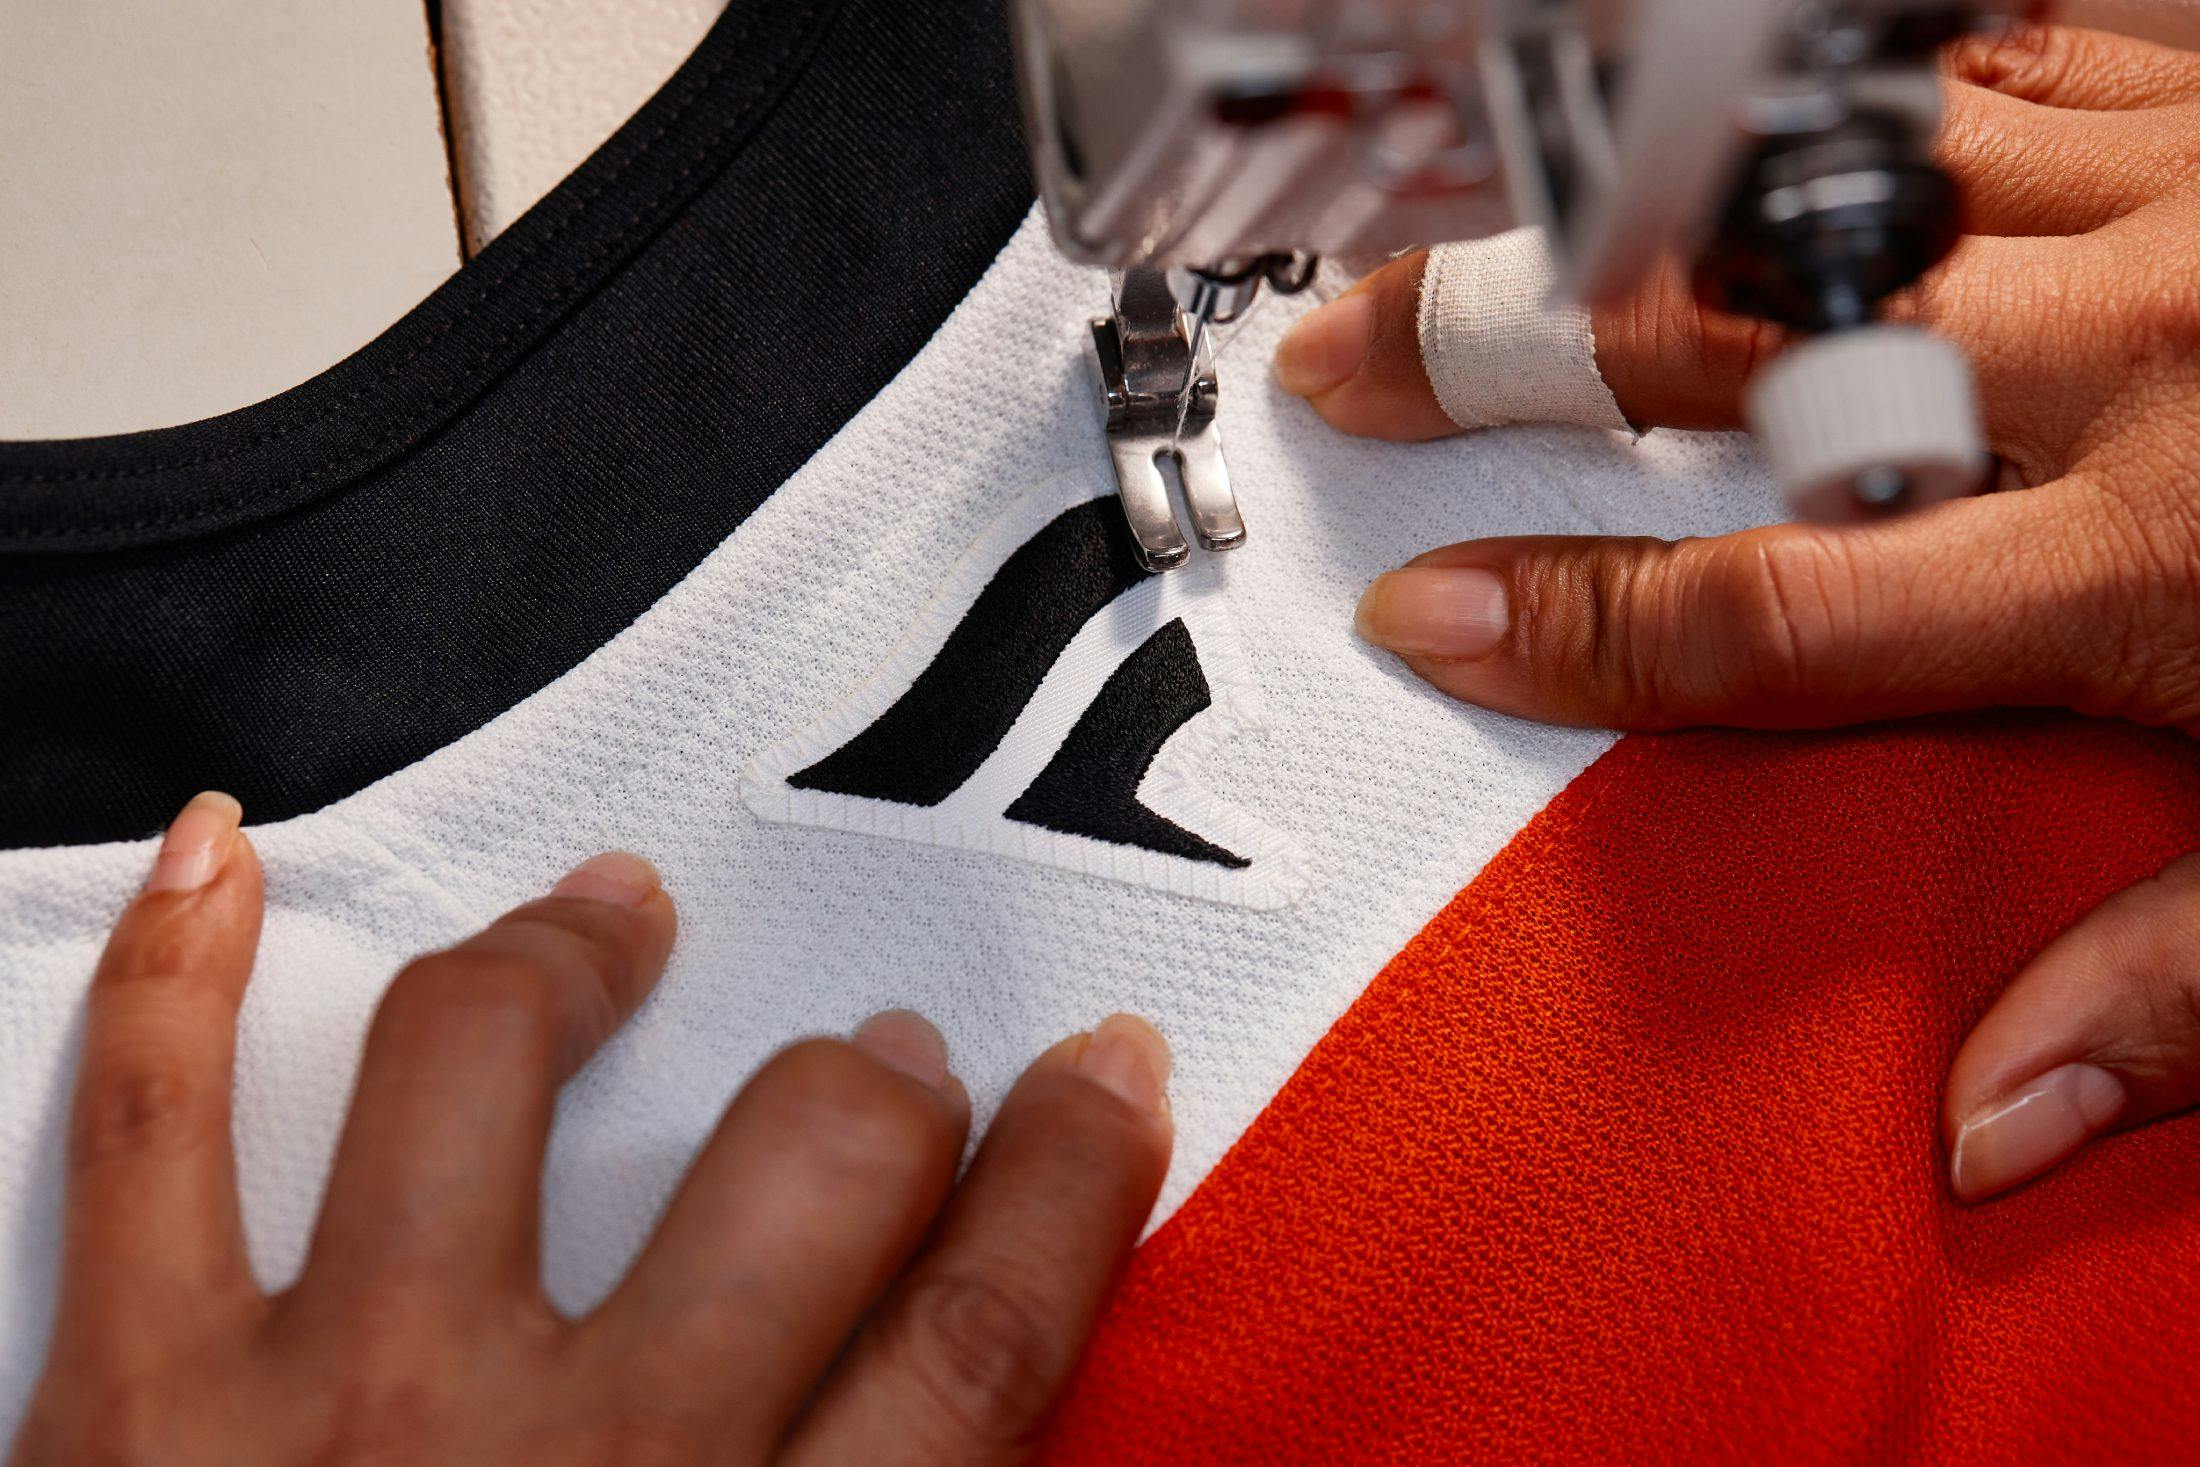 Expect a seamless transition as Fanatics eases into NHL jersey production